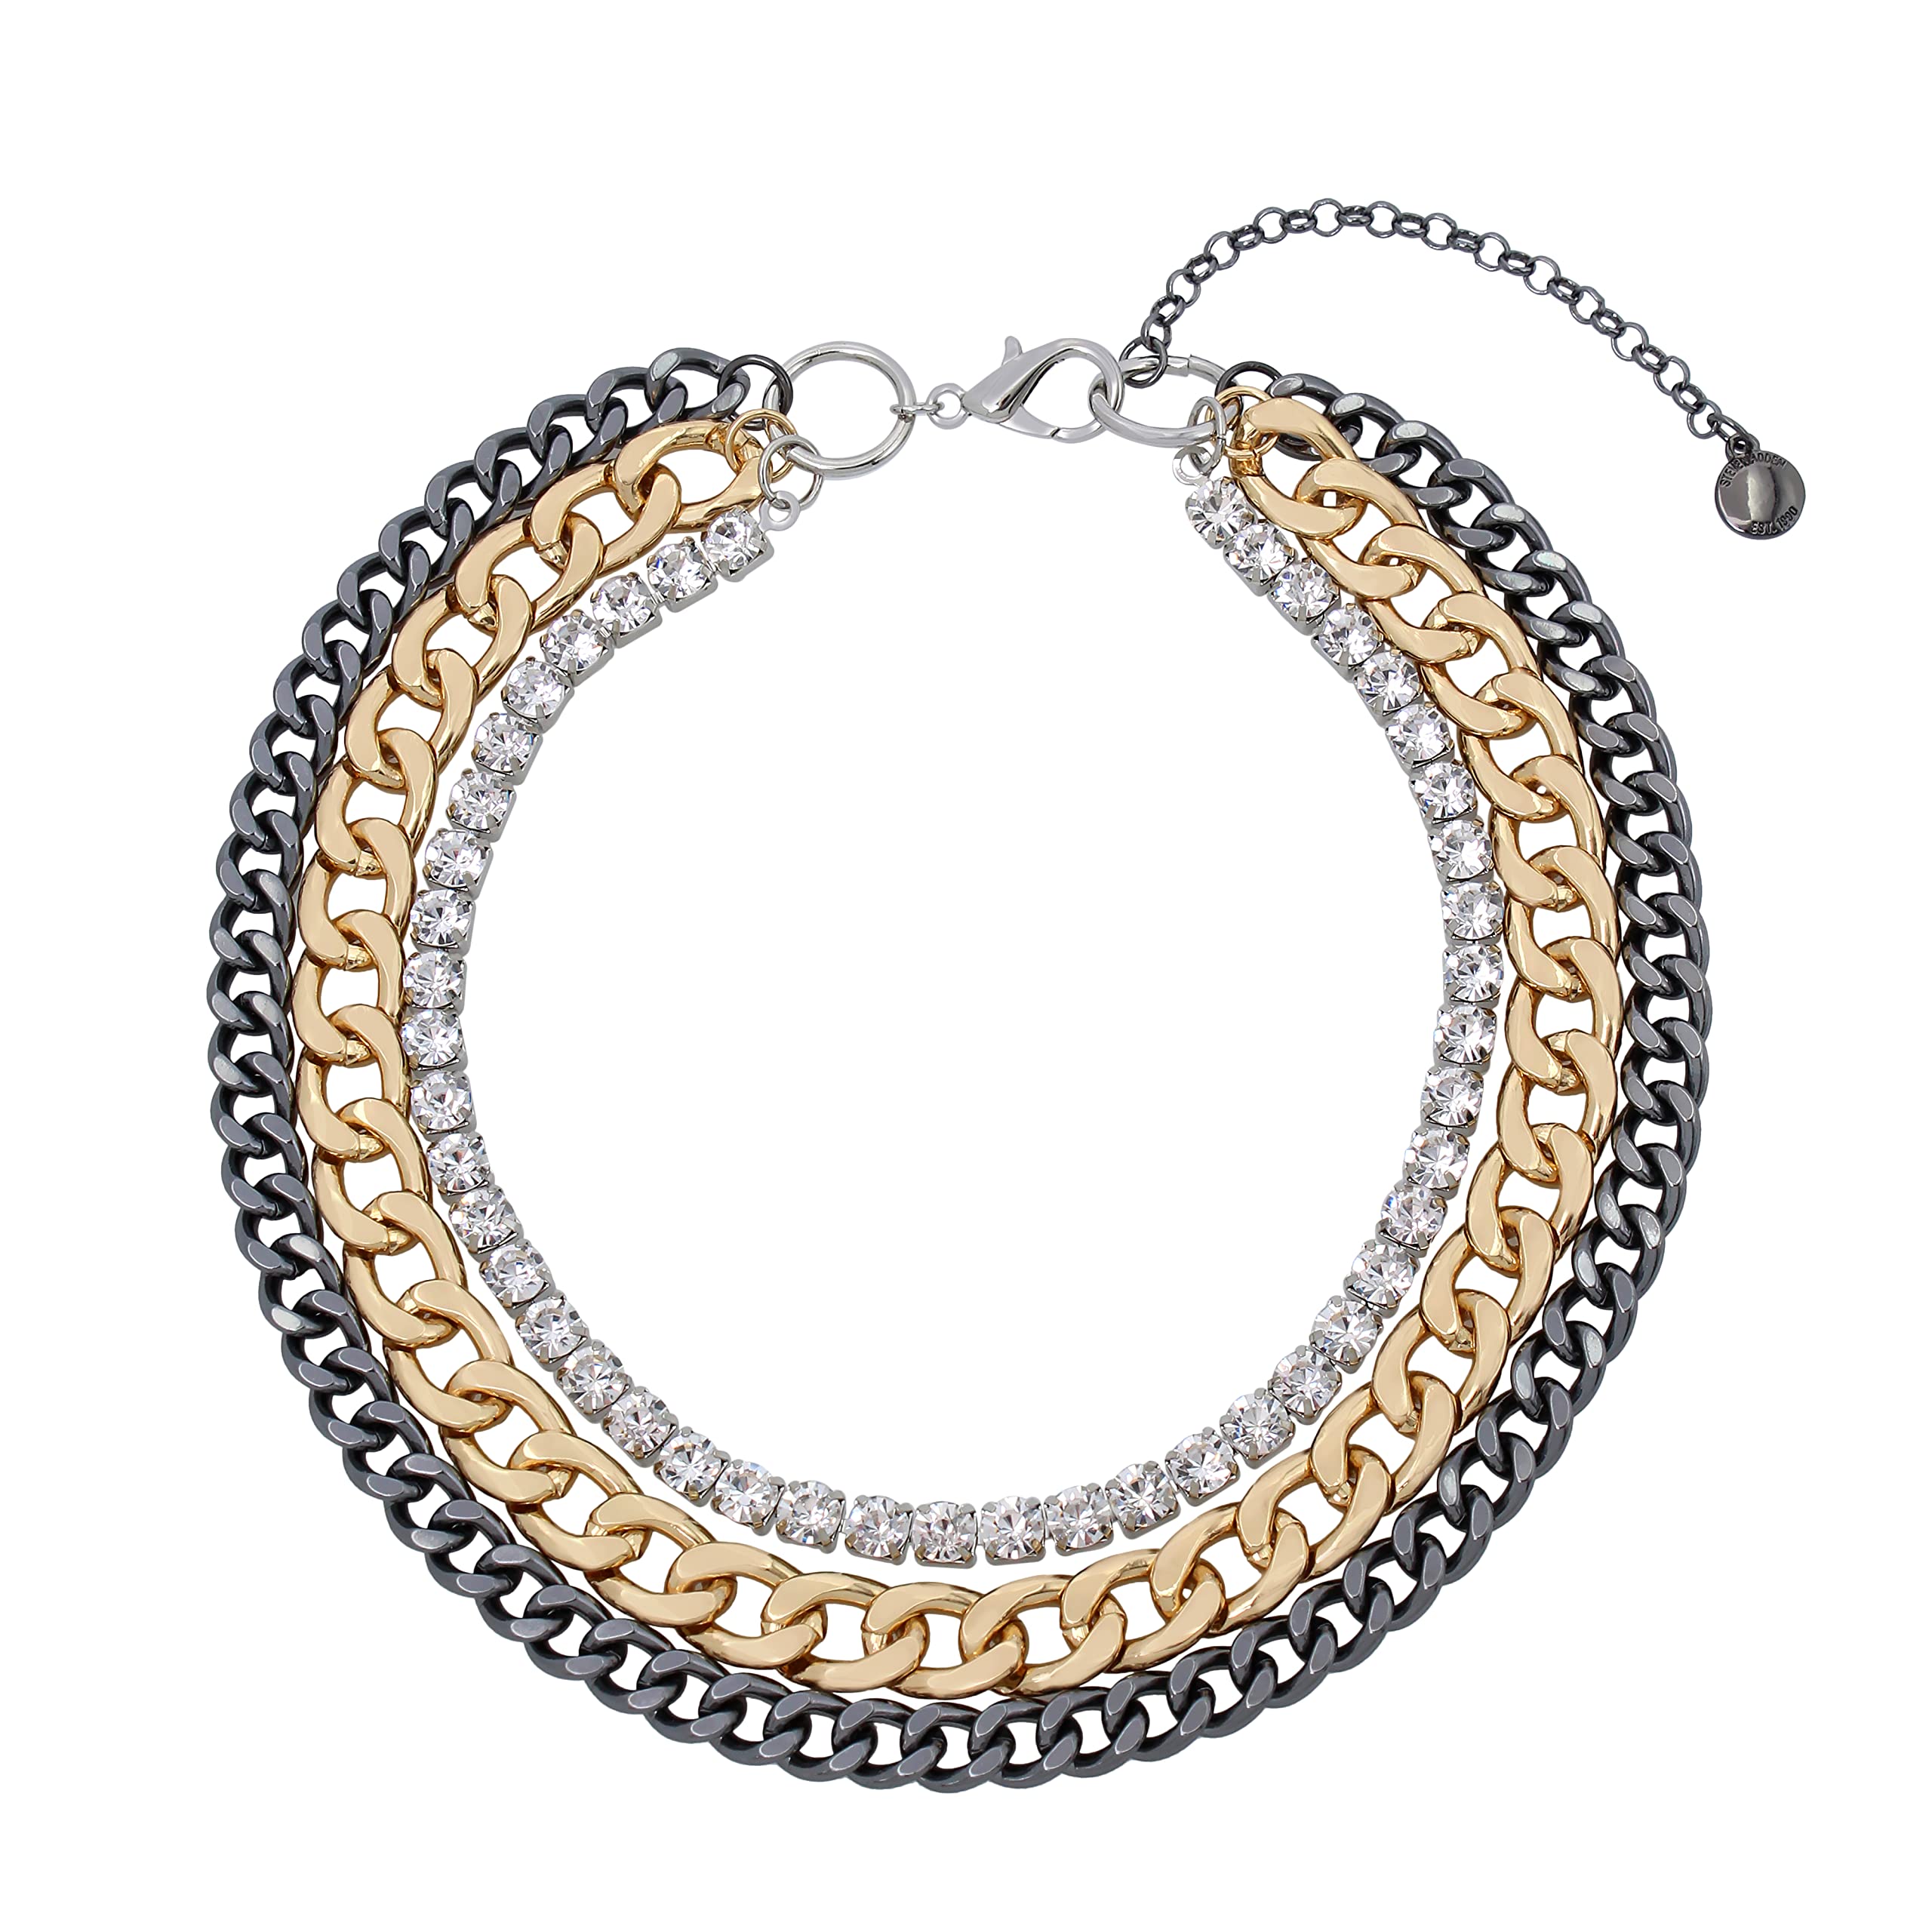 Steve Madden Layered Chain Necklace